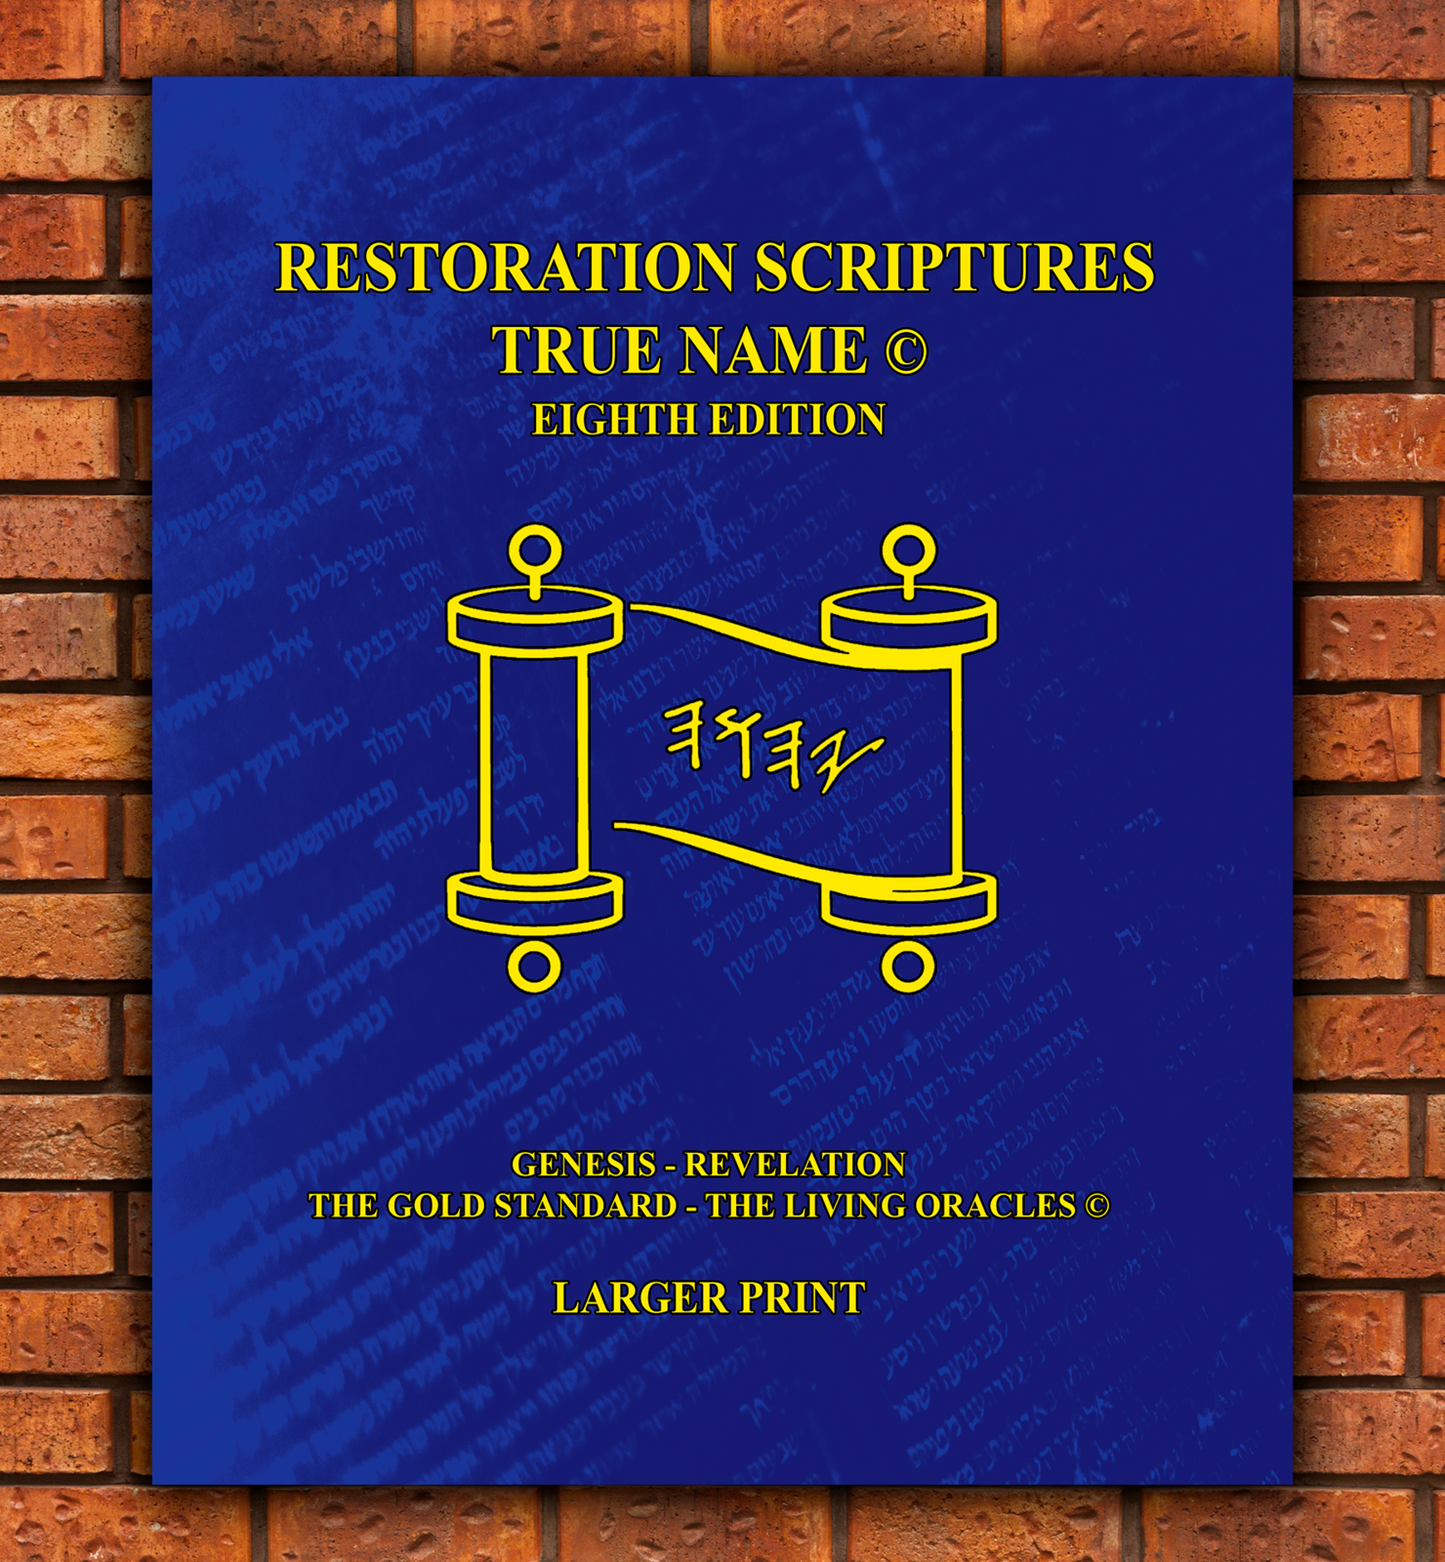 The Power Two Pack The Restoration Scriptures True Name Eighth Larger Print Edition - Genesis-Revelation + Apocrypha With Modern English